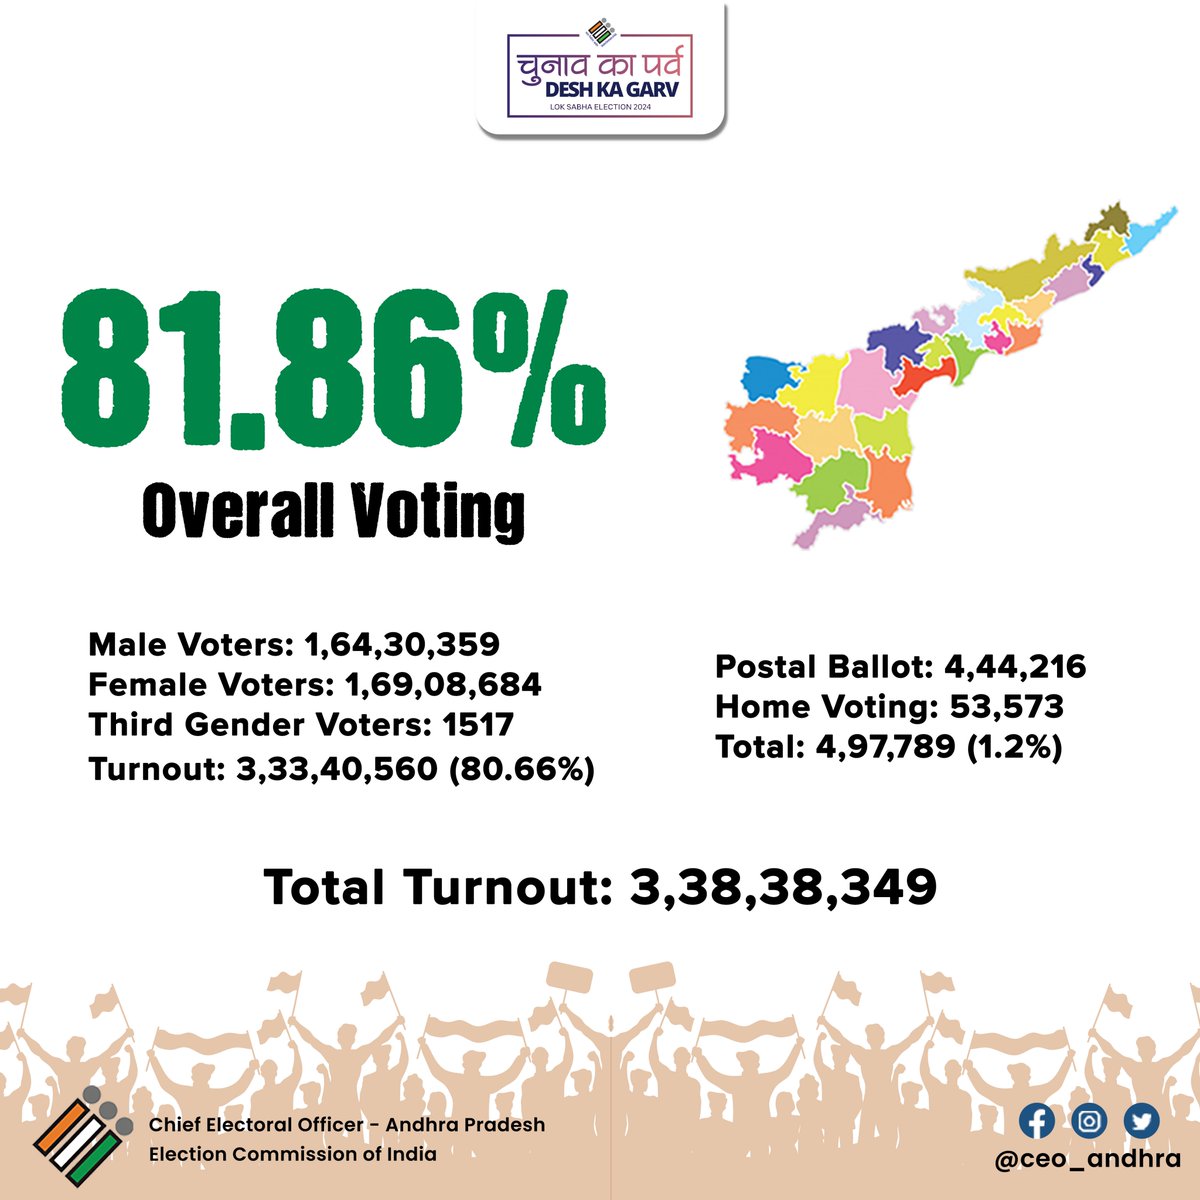 Andhra Pradesh's voters show us the power of democracy in action and record the highest voter turnout among the 4 Phases of polling concluded until now in the 2024 General Elections. Thank you for voting! #APElections2024 #SVEEP #ChunavKaParv #DeshKaGarv #ECI…